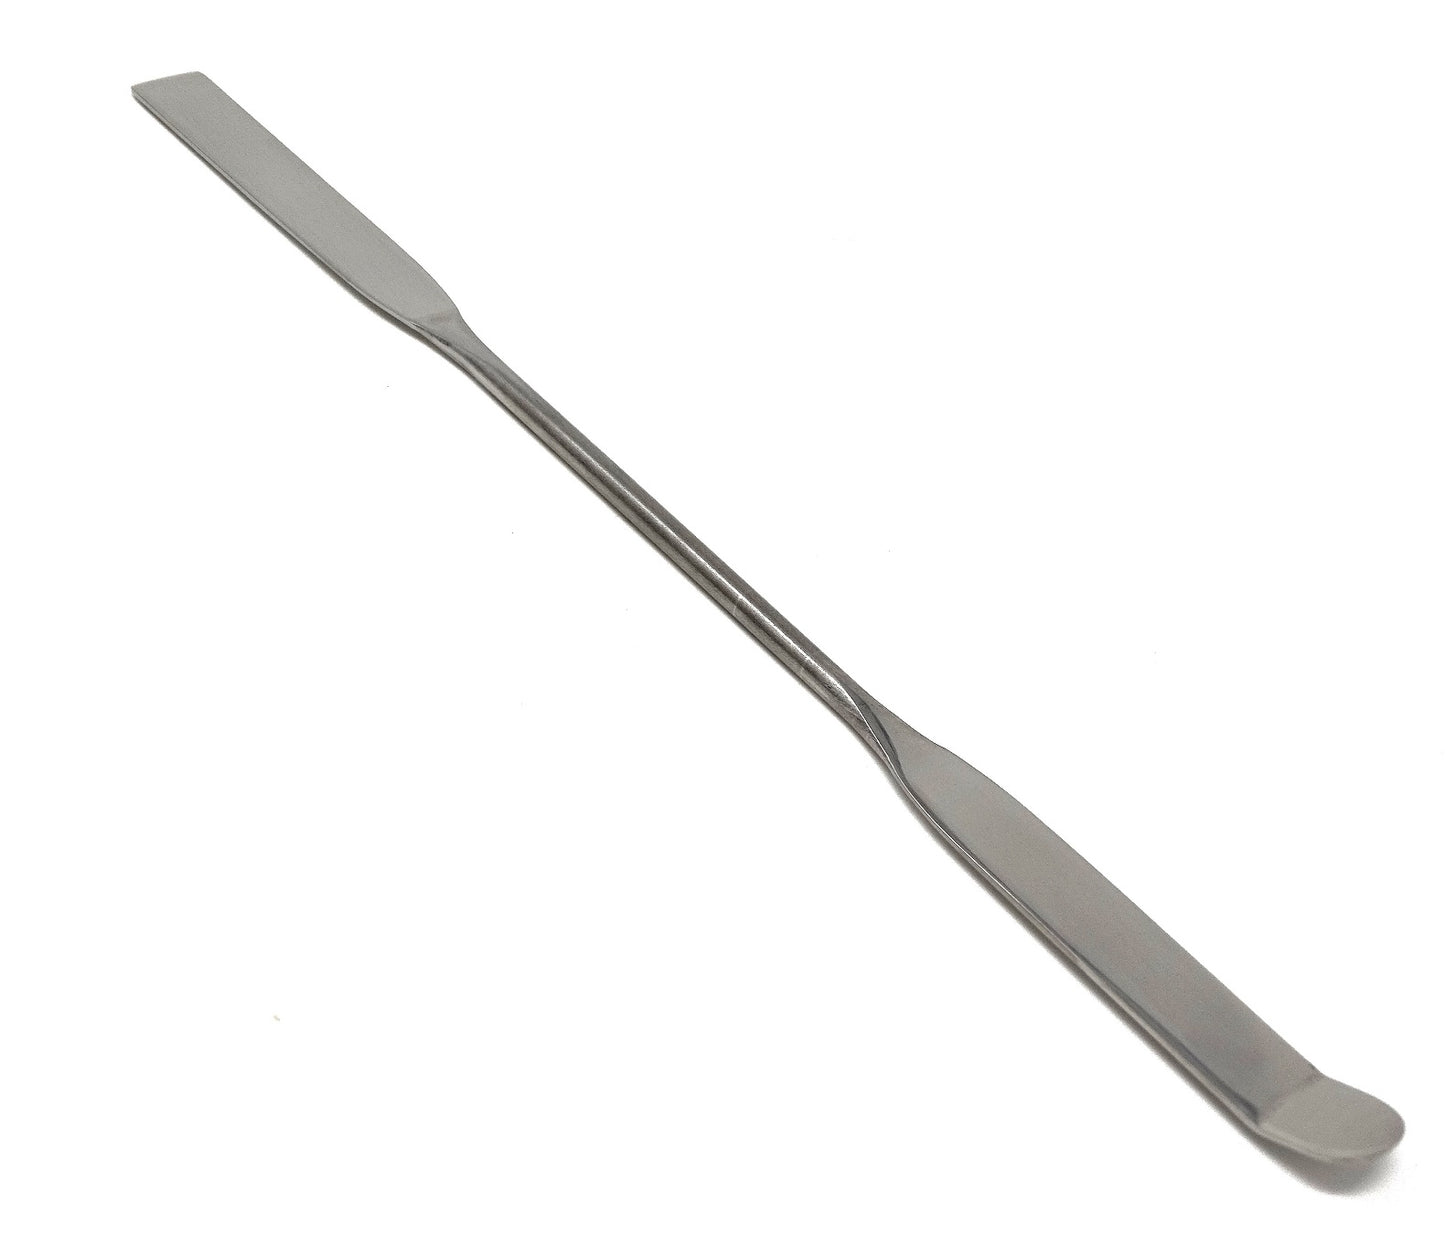 IMS-DE007 Stainless Steel Double Ended Micro Lab Spatula Sampler, Square & Round Angled End, 8" Length